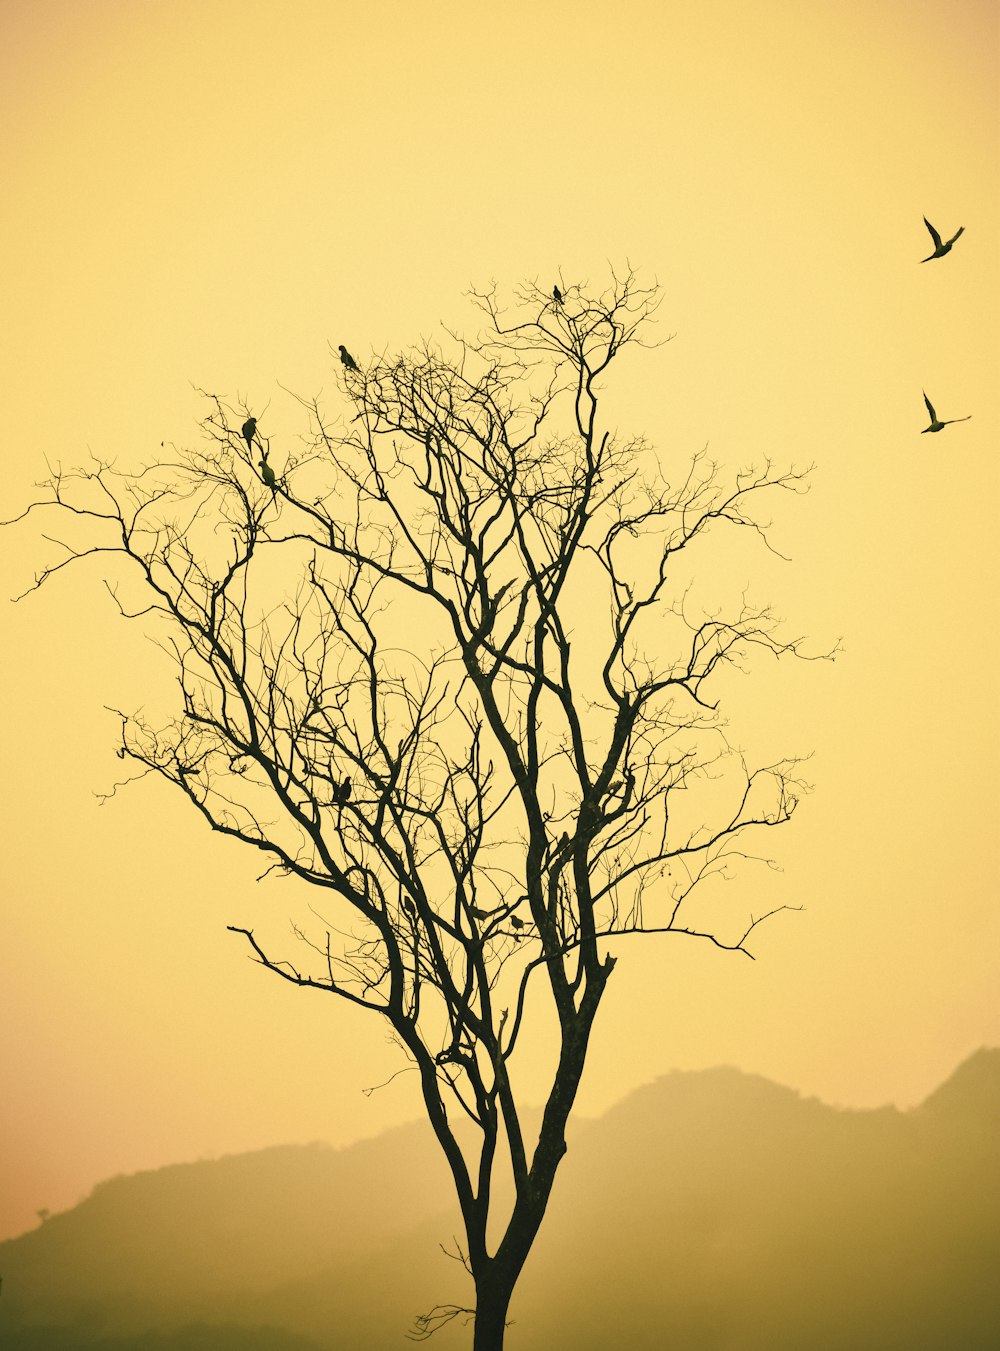 a tree with no leaves and birds flying in the sky